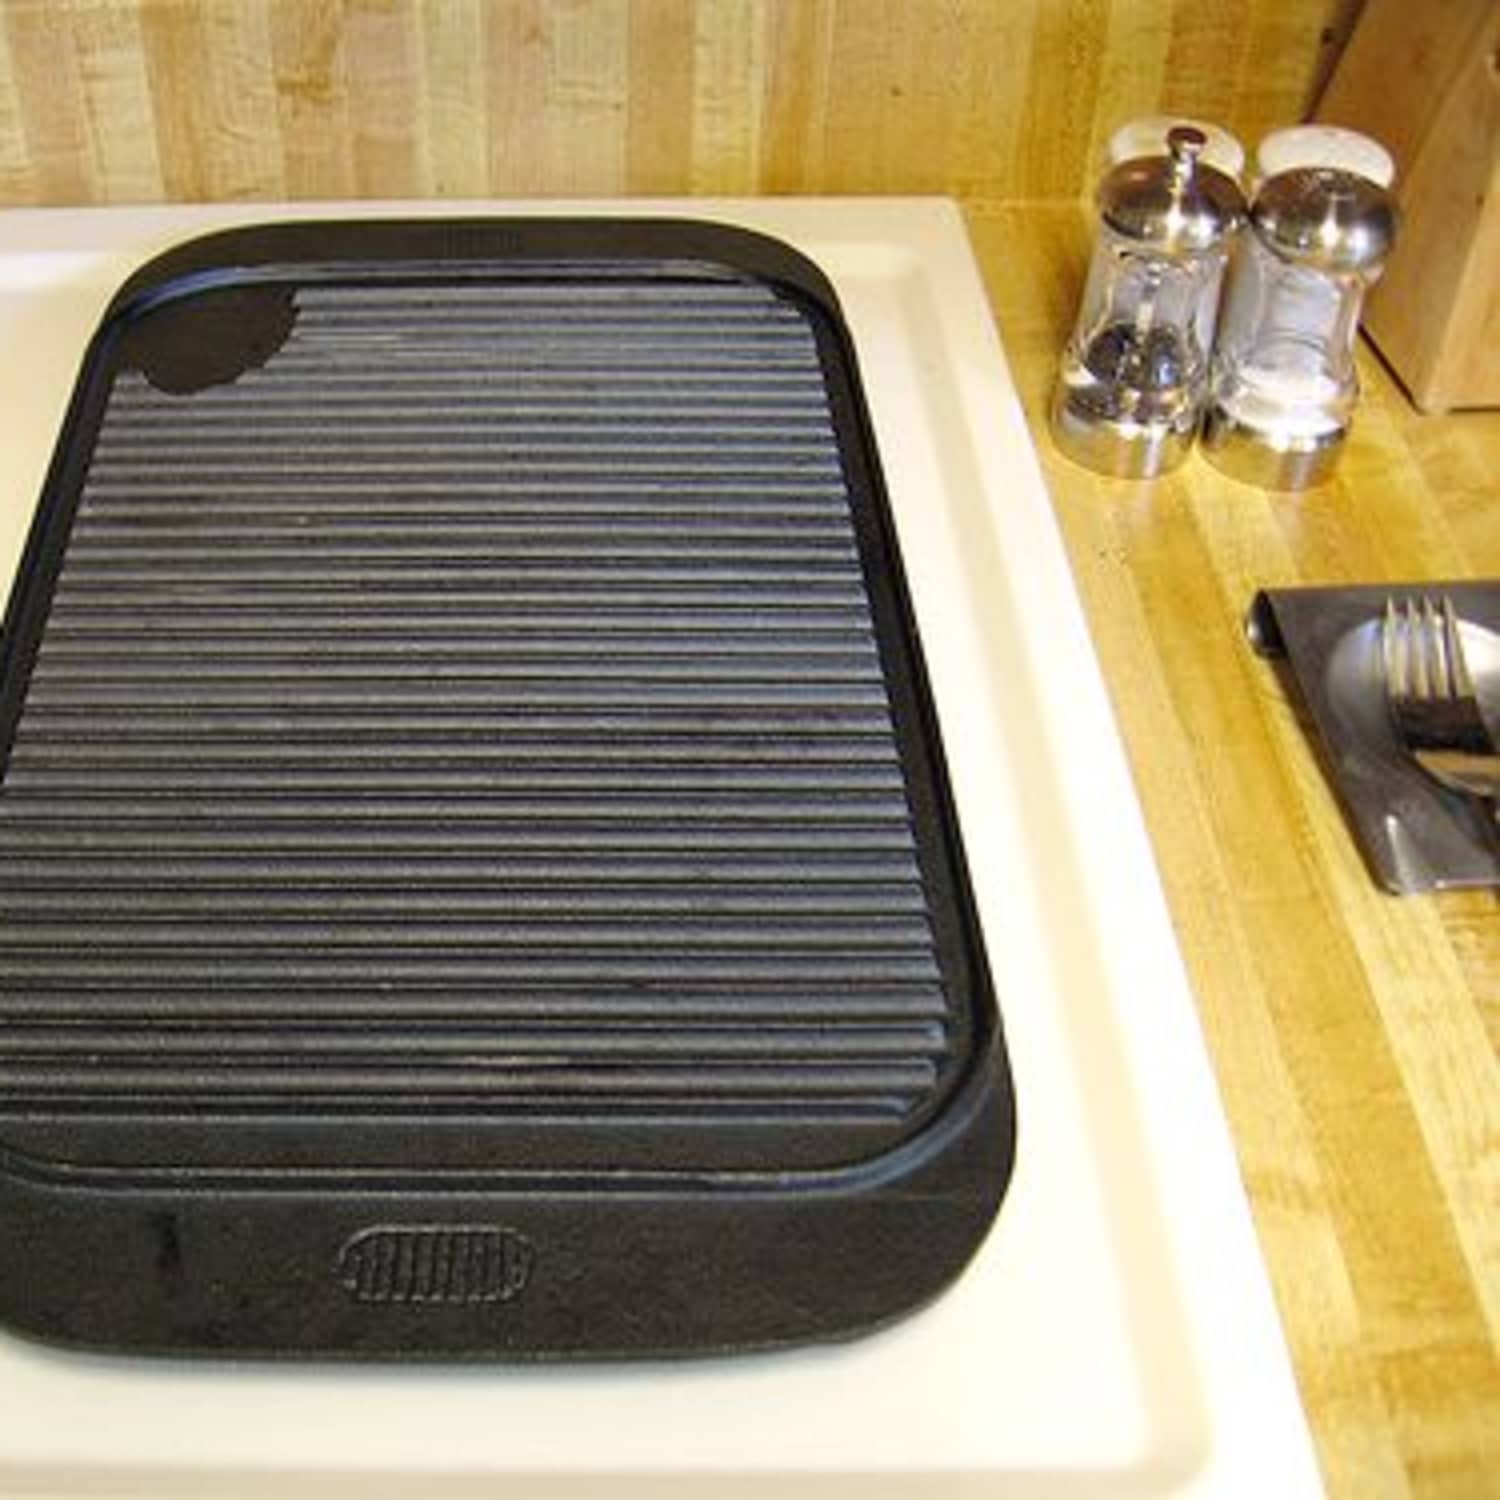 Non Stick Speckled Indoor Grill Pan Country Kitchen Cookware Forged Aluminum Griddle Pan Black For Gas and Electric Stovetop 11 Inches 